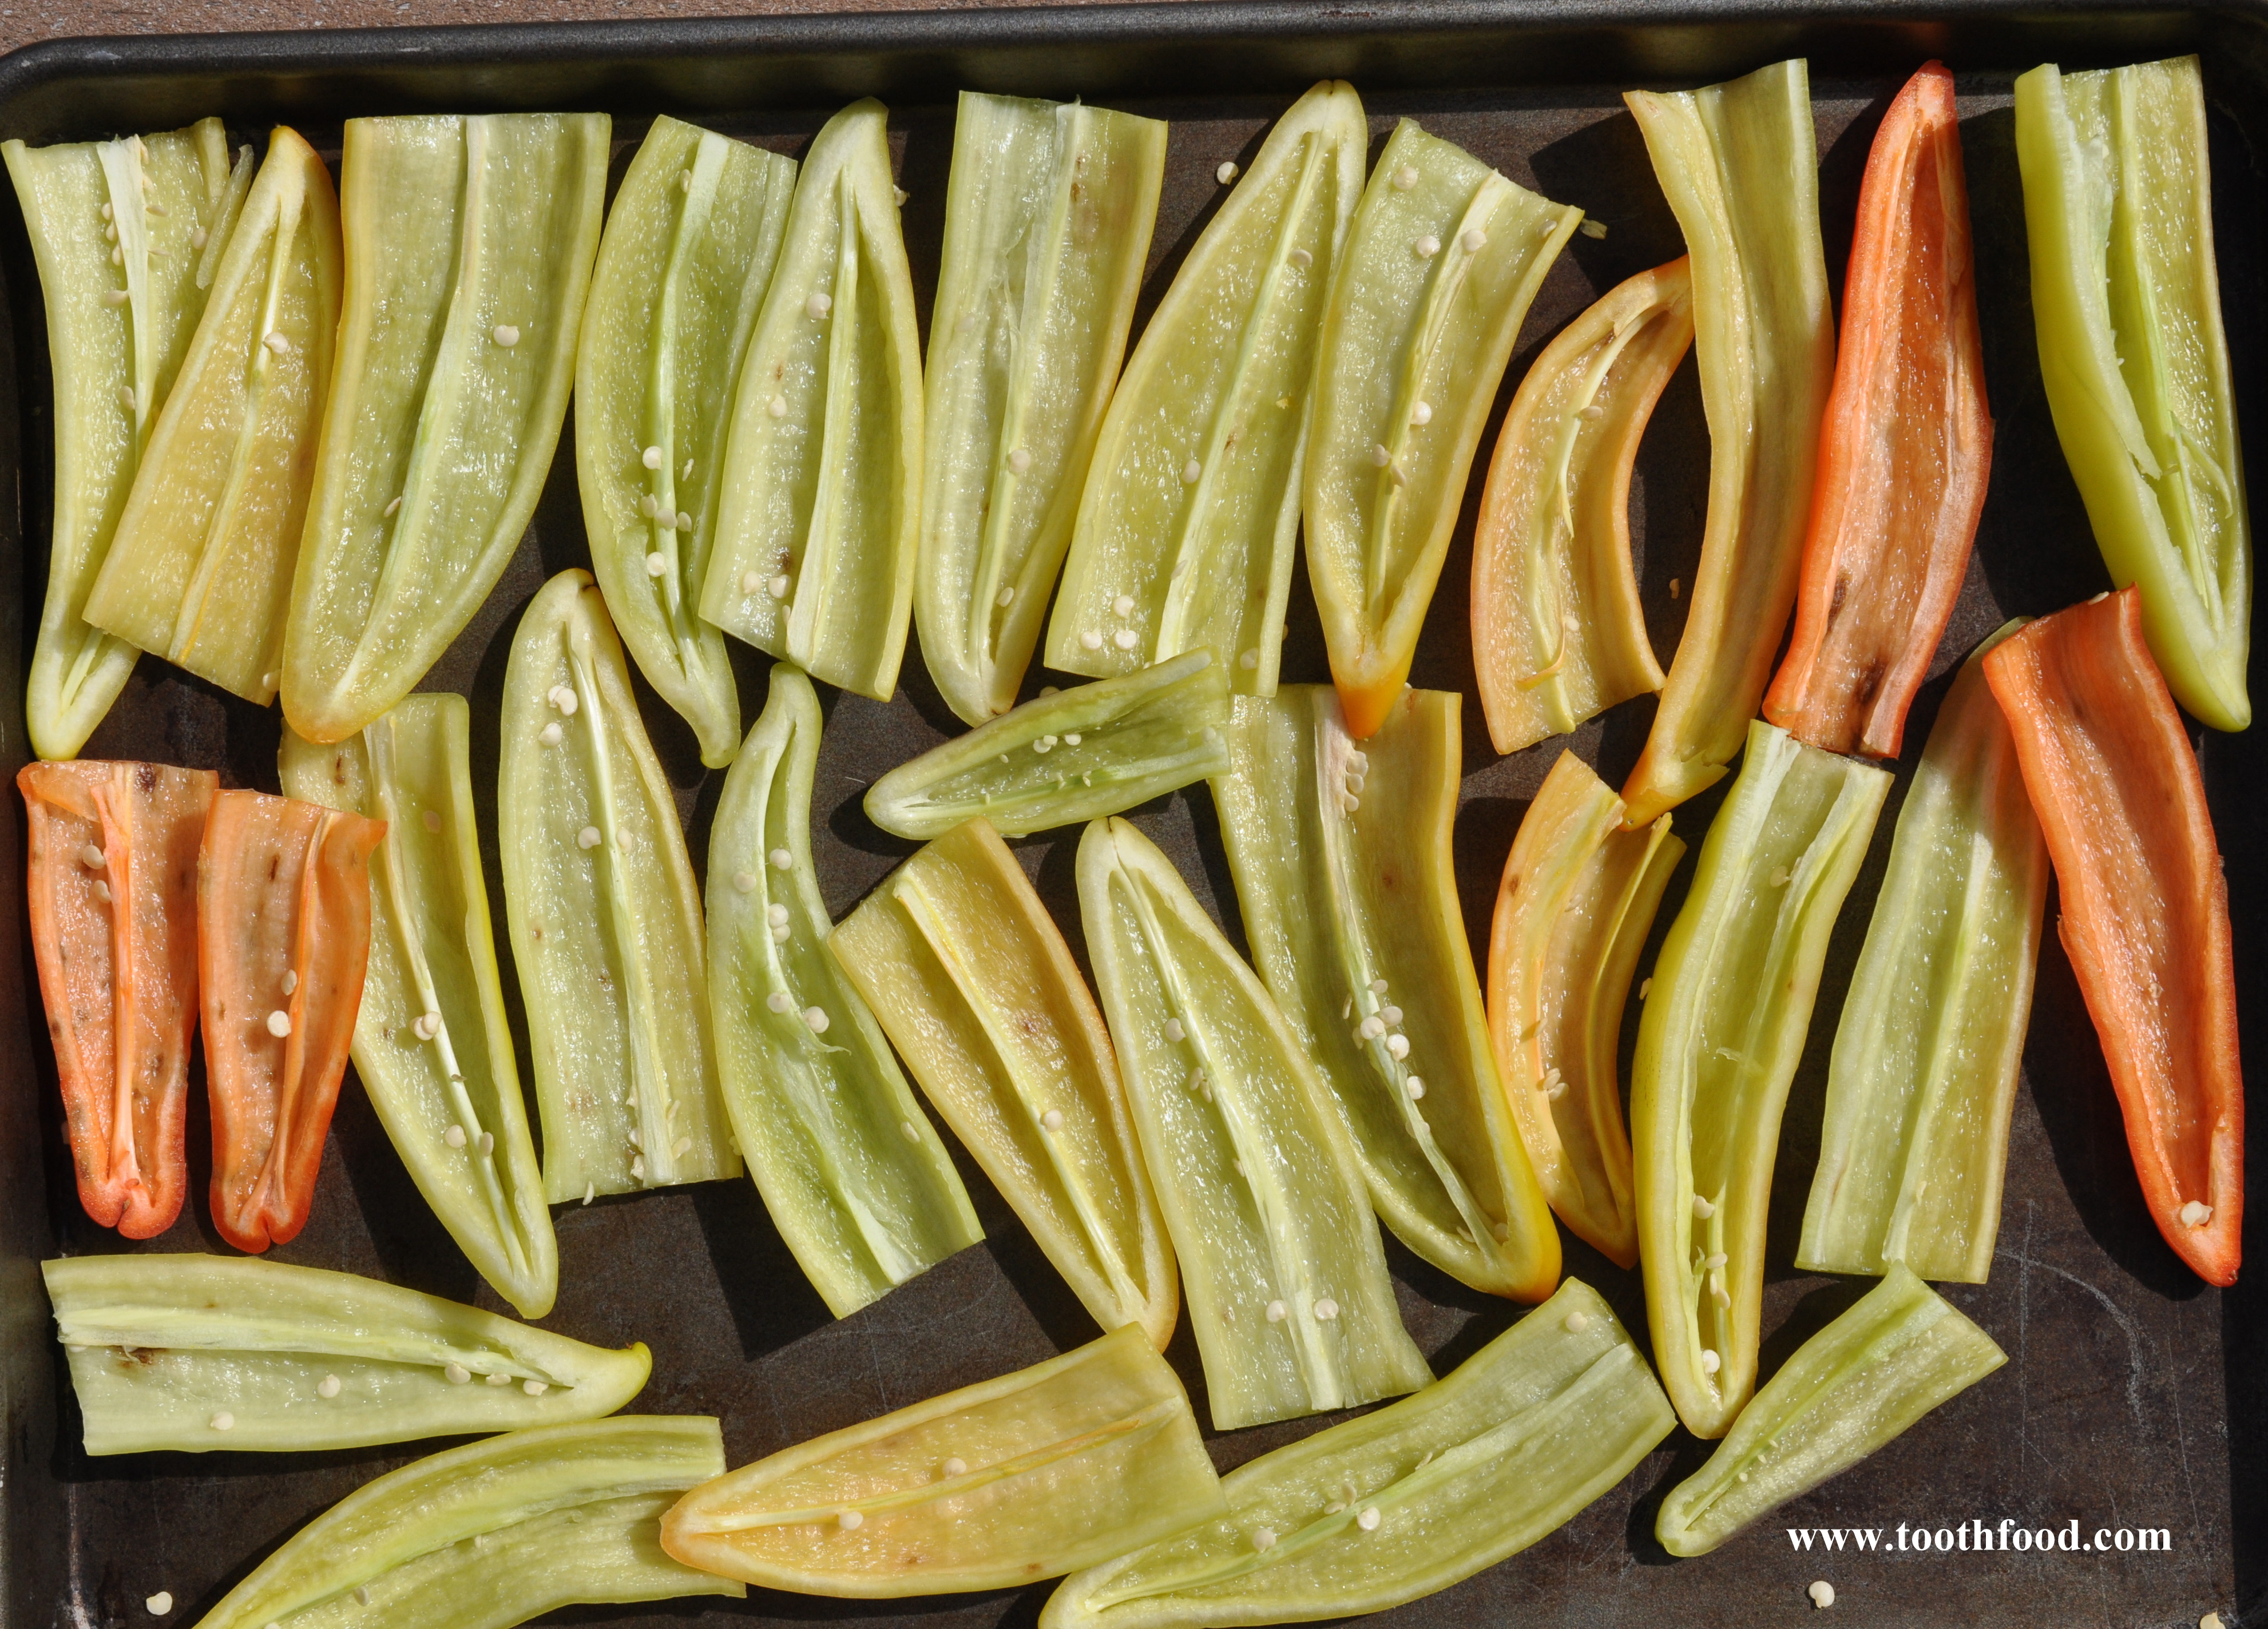 Banana Peppers Stuffed With Summer Vegetables | Garden Fresh Foodie